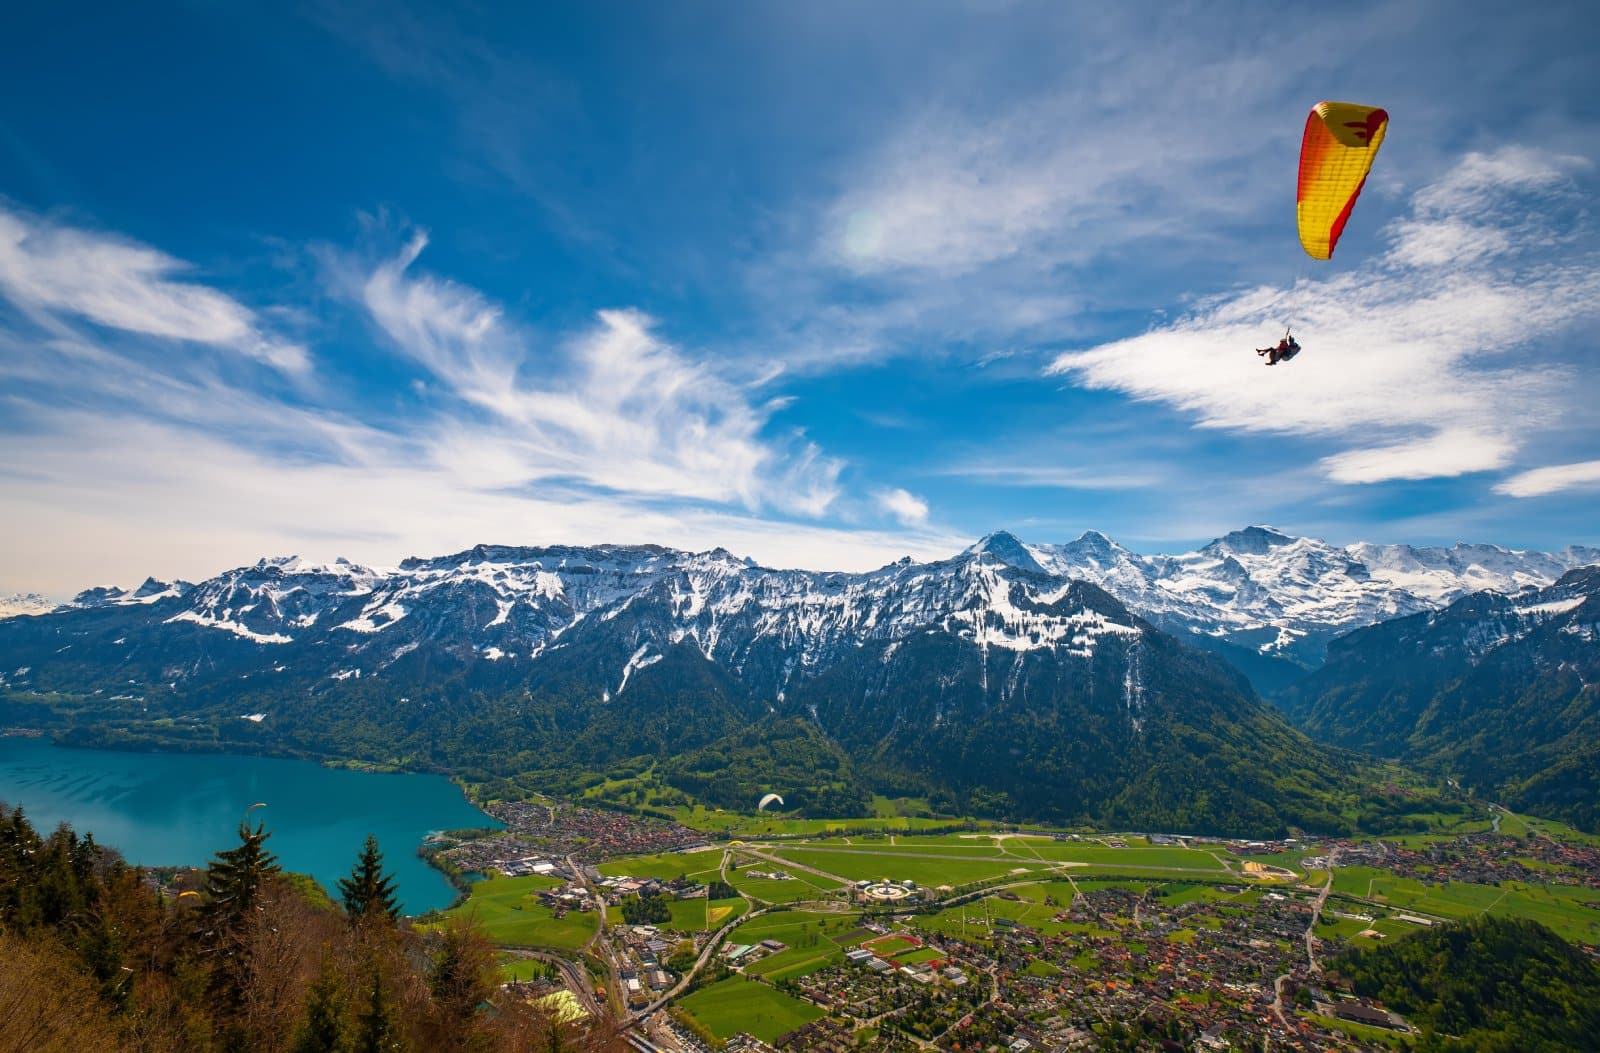 <p class="wp-caption-text">Image Credit: Shutterstock / Haidamac</p>  <p><span>The thrill of paragliding in Interlaken offers more than just an adrenaline rush; it presents a bird’s-eye view of Switzerland’s breathtaking landscapes. Floating above the emerald lakes of Thun and Brienz and gazing at the majestic peaks of the Eiger, Mönch, and Jungfrau, you’ll experience a sense of freedom and awe that’s hard to find elsewhere. Interlaken is renowned for its welcoming attitude towards LGBTQ+ adventurers, ensuring that a sense of belonging and acceptance matches the exhilaration of flight. The town itself, nestled between lakes and mountains, is a hub of outdoor activity, where the air is filled with the spirit of adventure. Paragliding here is accessible to all, with tandem flights guided by experienced pilots who prioritize safety and inclusivity, making it an unforgettable way to witness the beauty of the Swiss Alps.</span></p>